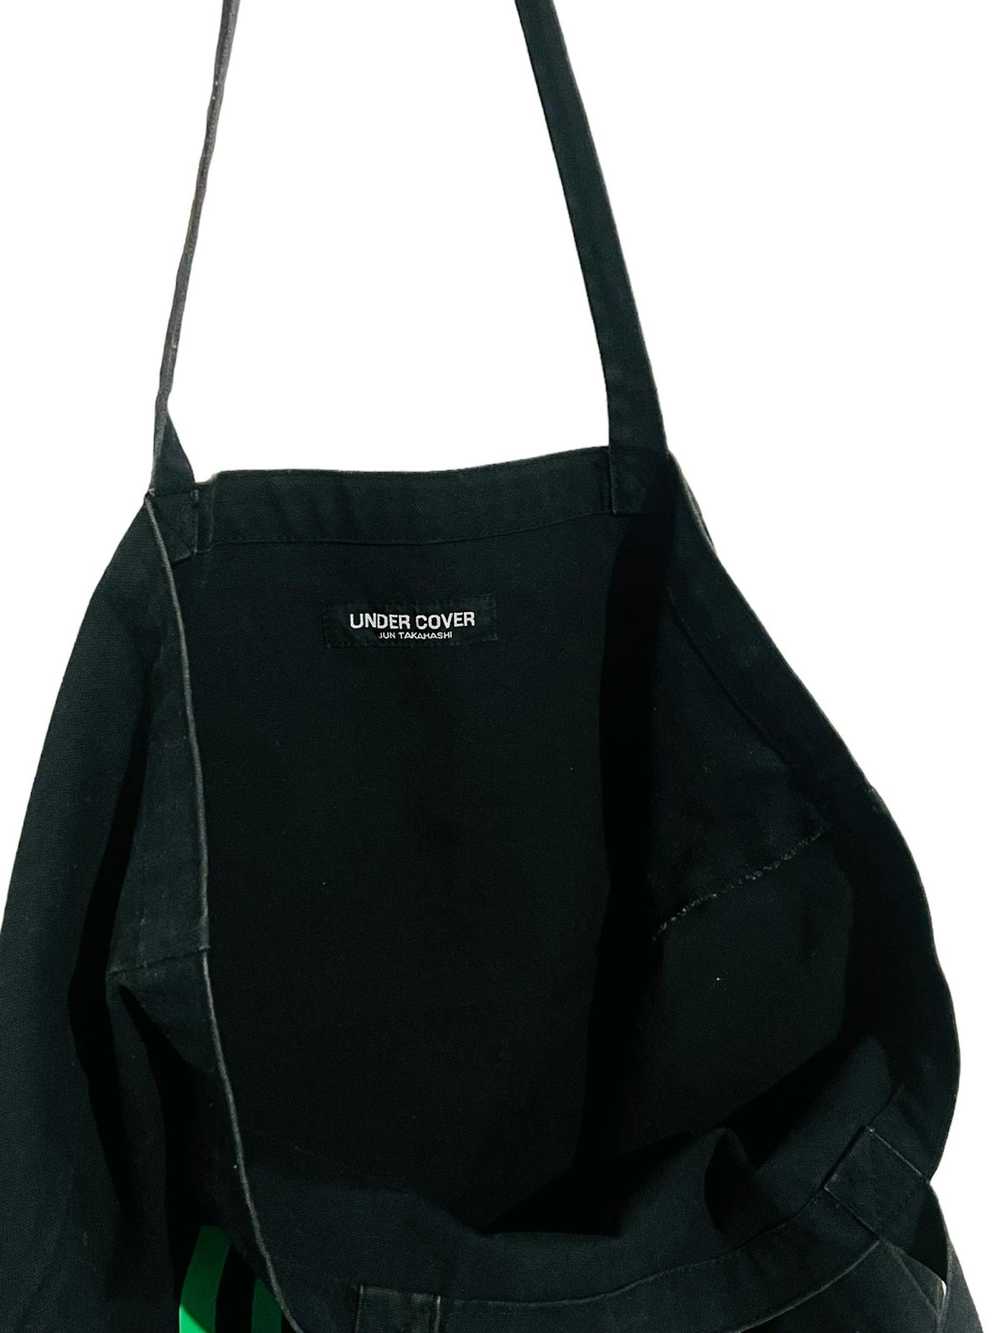 Undercover 🔥 F.U.C.K Tote Bag FOR UNLAWFUL CARNA… - image 4